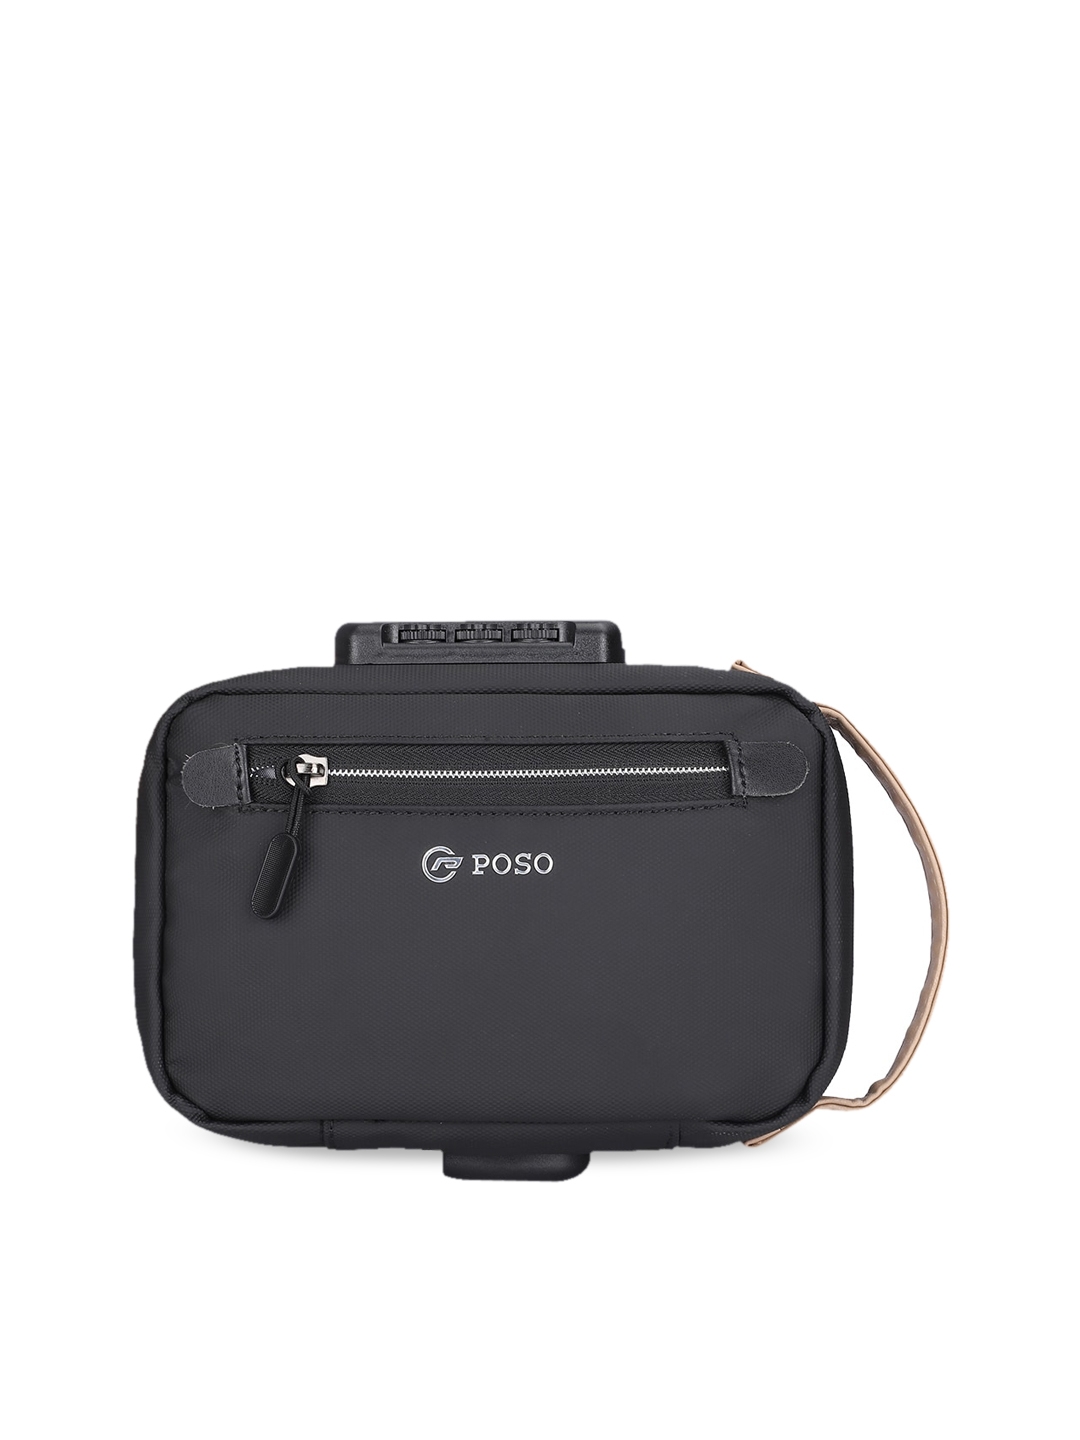 POSO Black Travel Cable Organizer with USB Charging   Number Lock